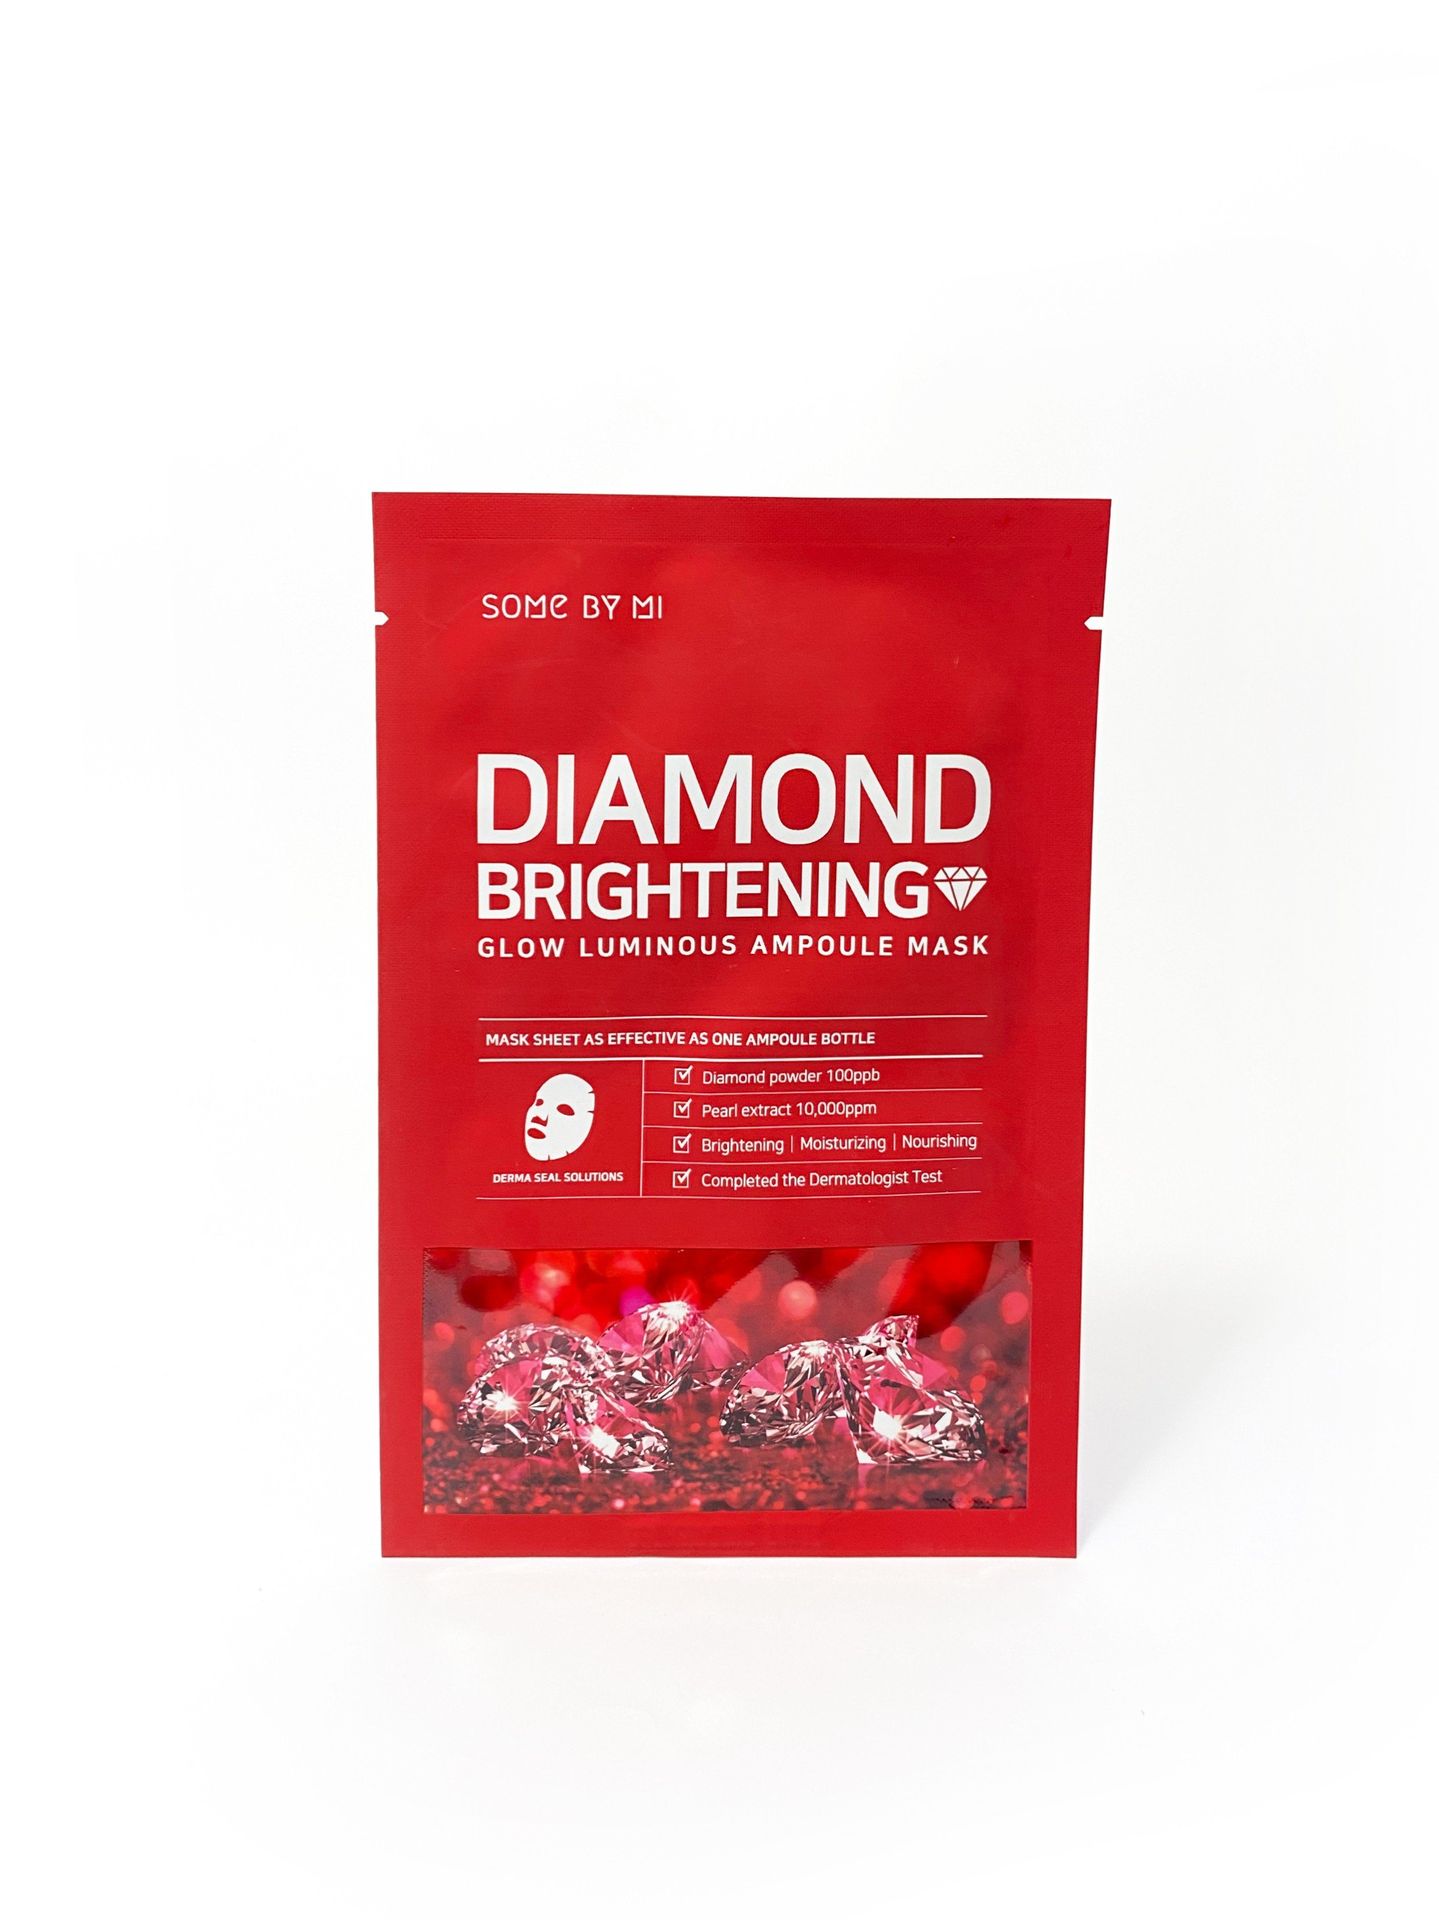 SOME BY MI - RED DIAMOND BRIGHTENING GLOW LUMINOUS AMPOULE MASK